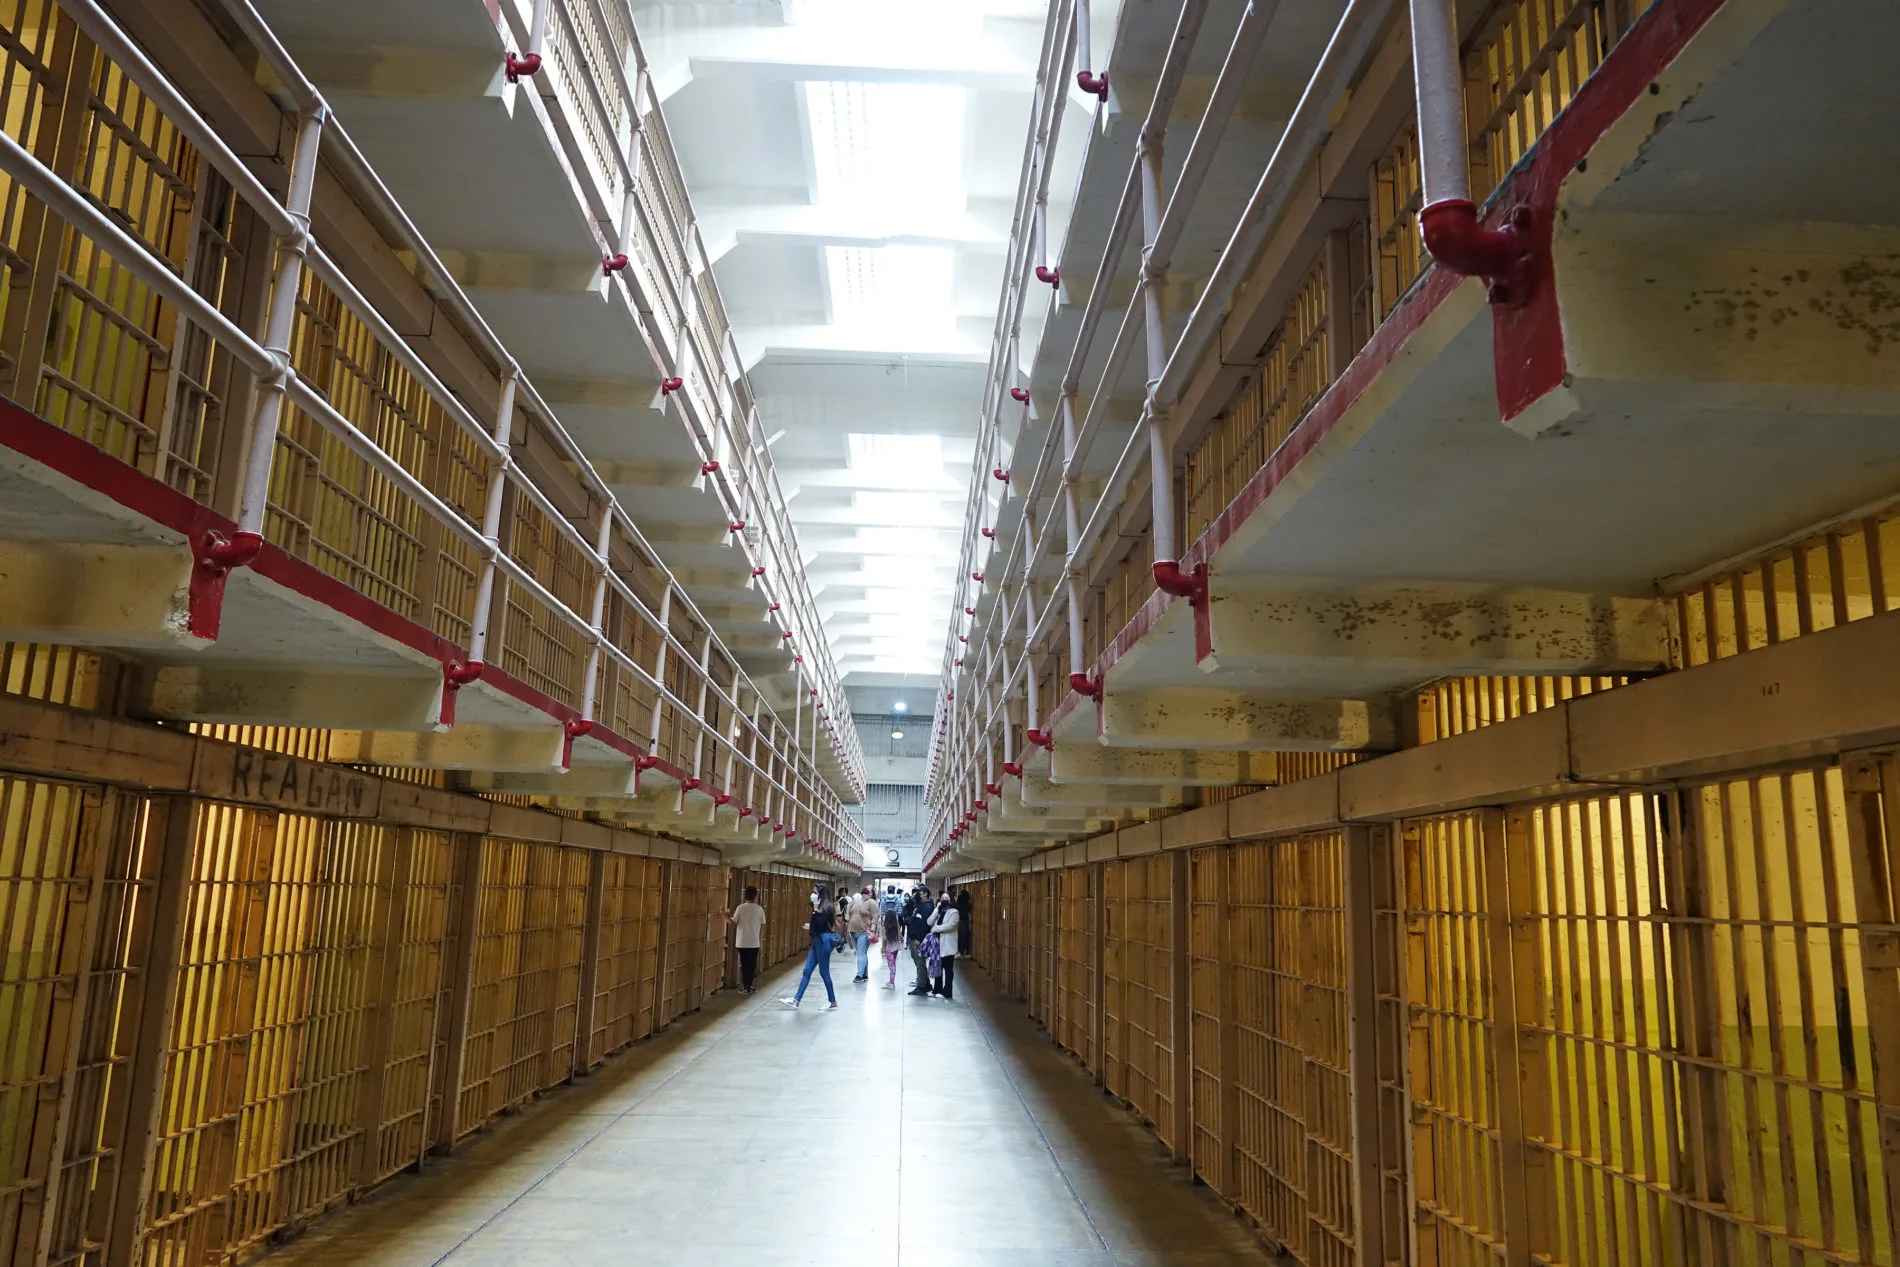 Three tiers of cells line both sides of the hallway called Broadway in the Alcatraz Cellhouse.